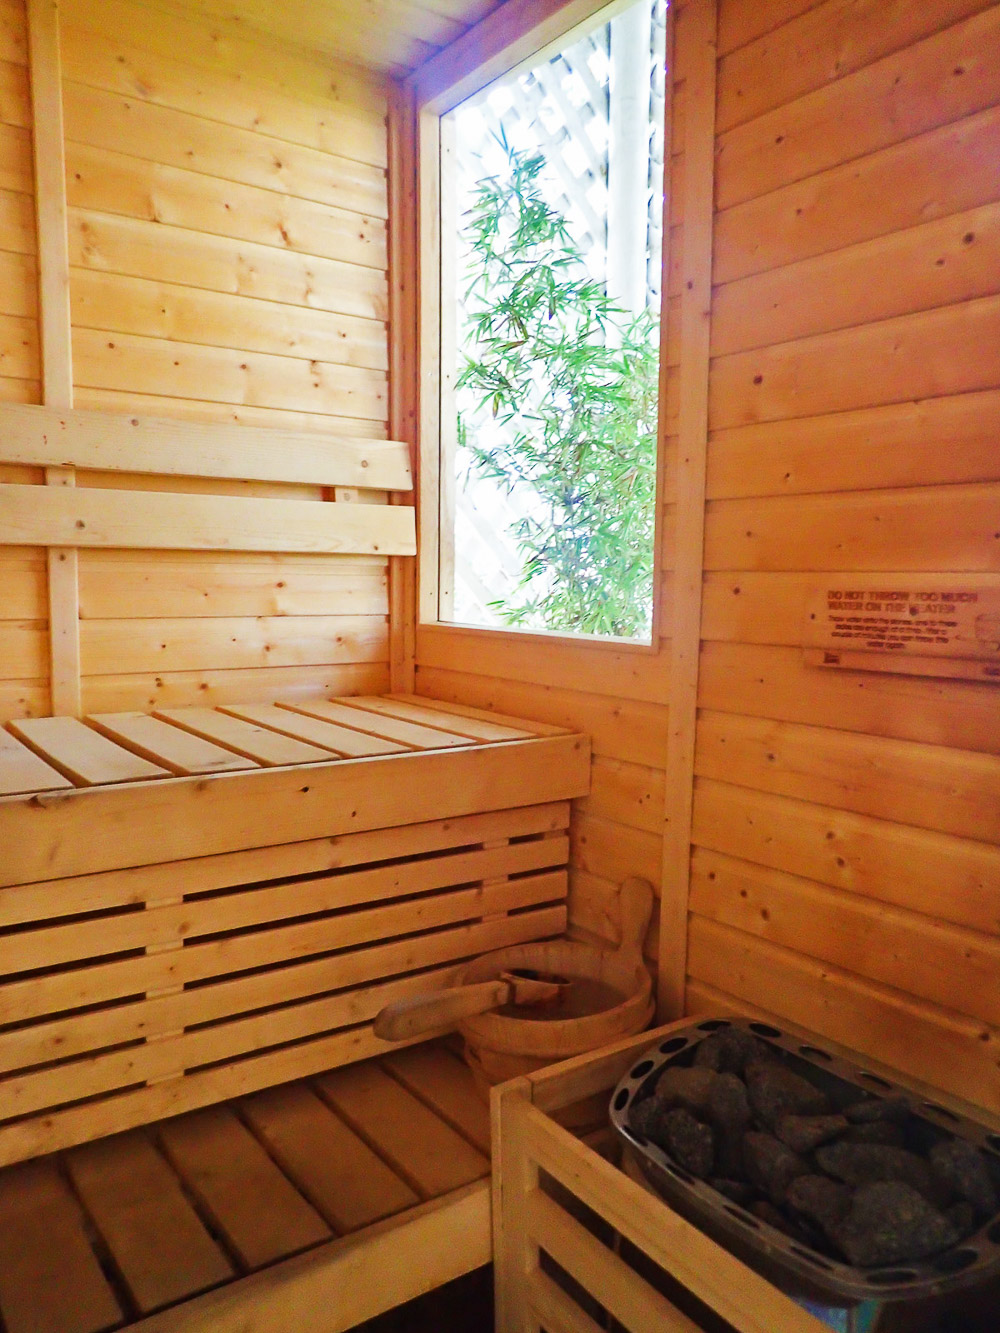 STEAM ROOM WITH A VIEW. Detox while enjoying the view.  